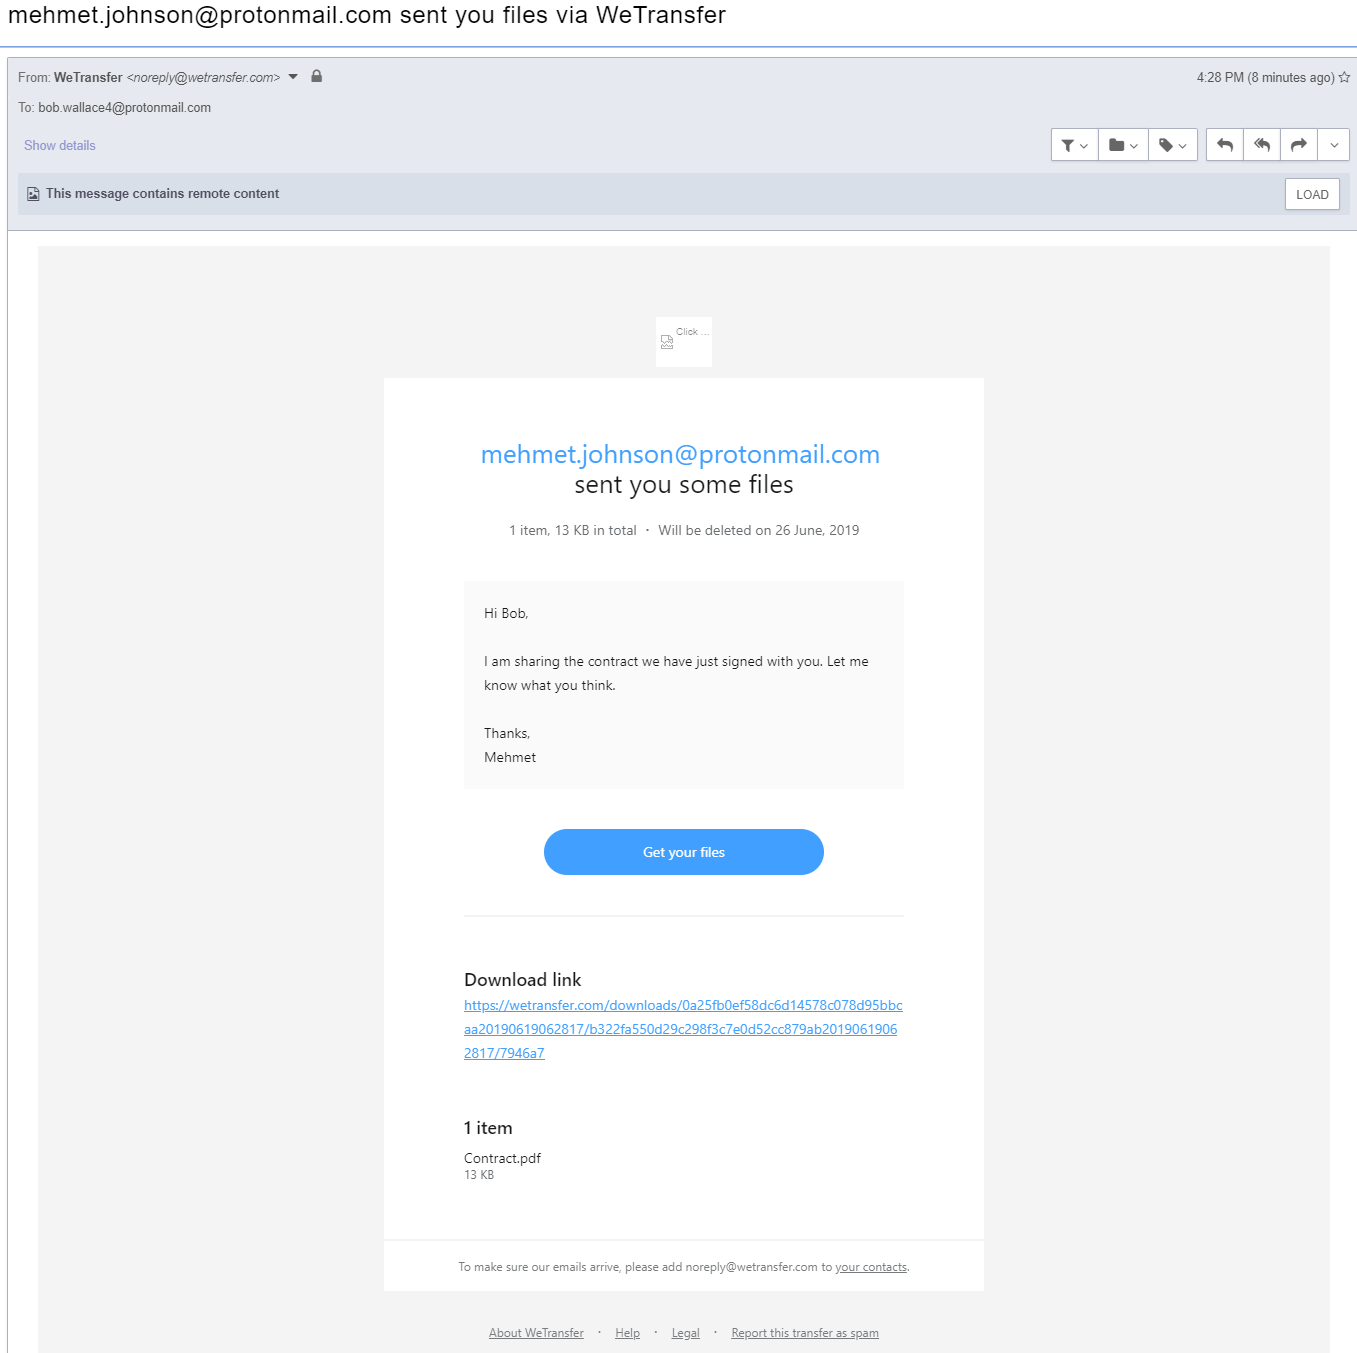 Example of a phishing email using a Dropbox file share through WeTransfer. This incident was investigated by the Mossé Security CSIRT (Computer Security Incident Response Team).